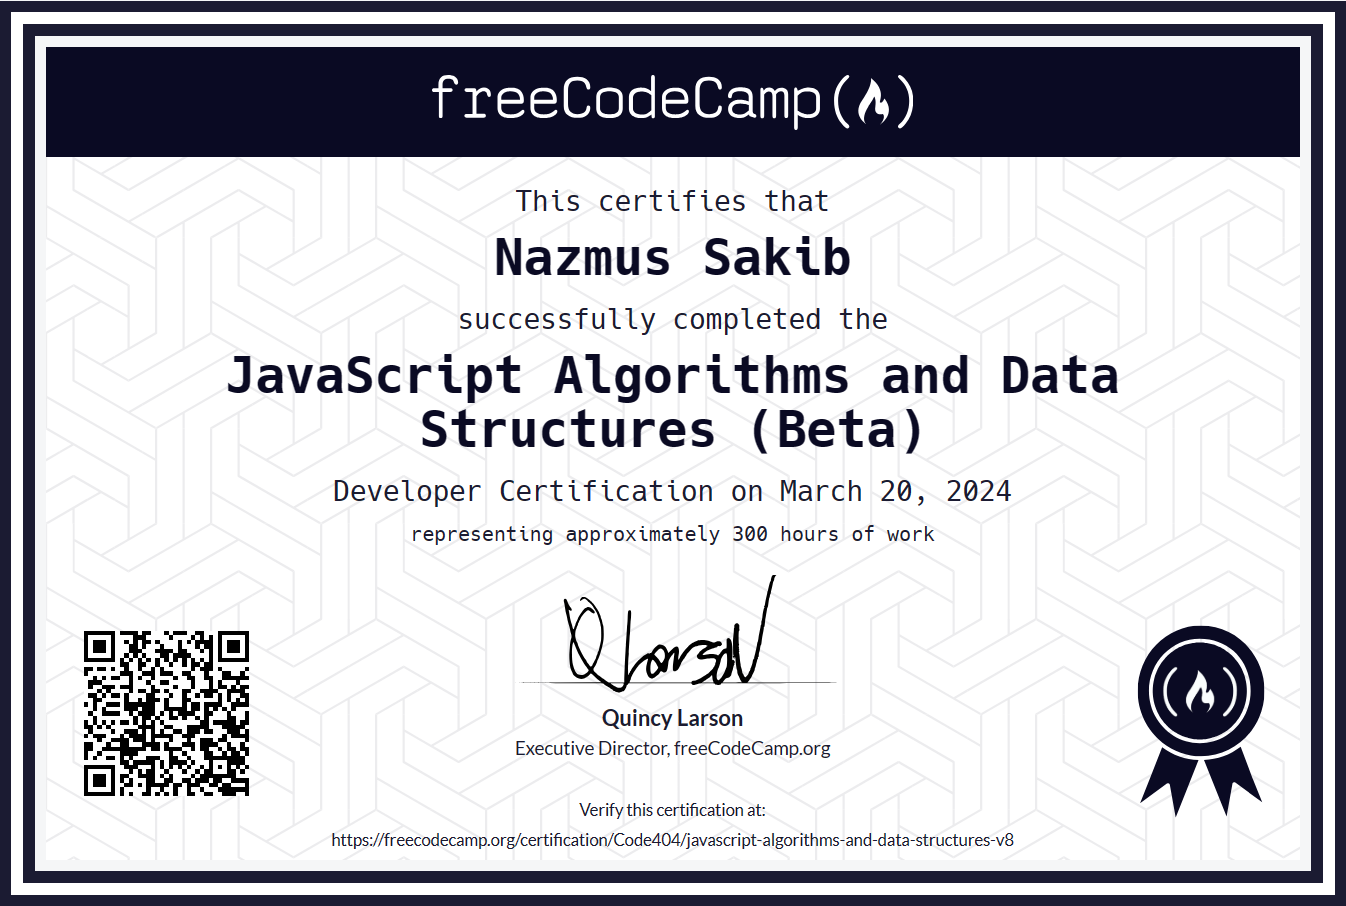 Javascript Algorithms And Data Structures Certification by FreeCodeCamp.org